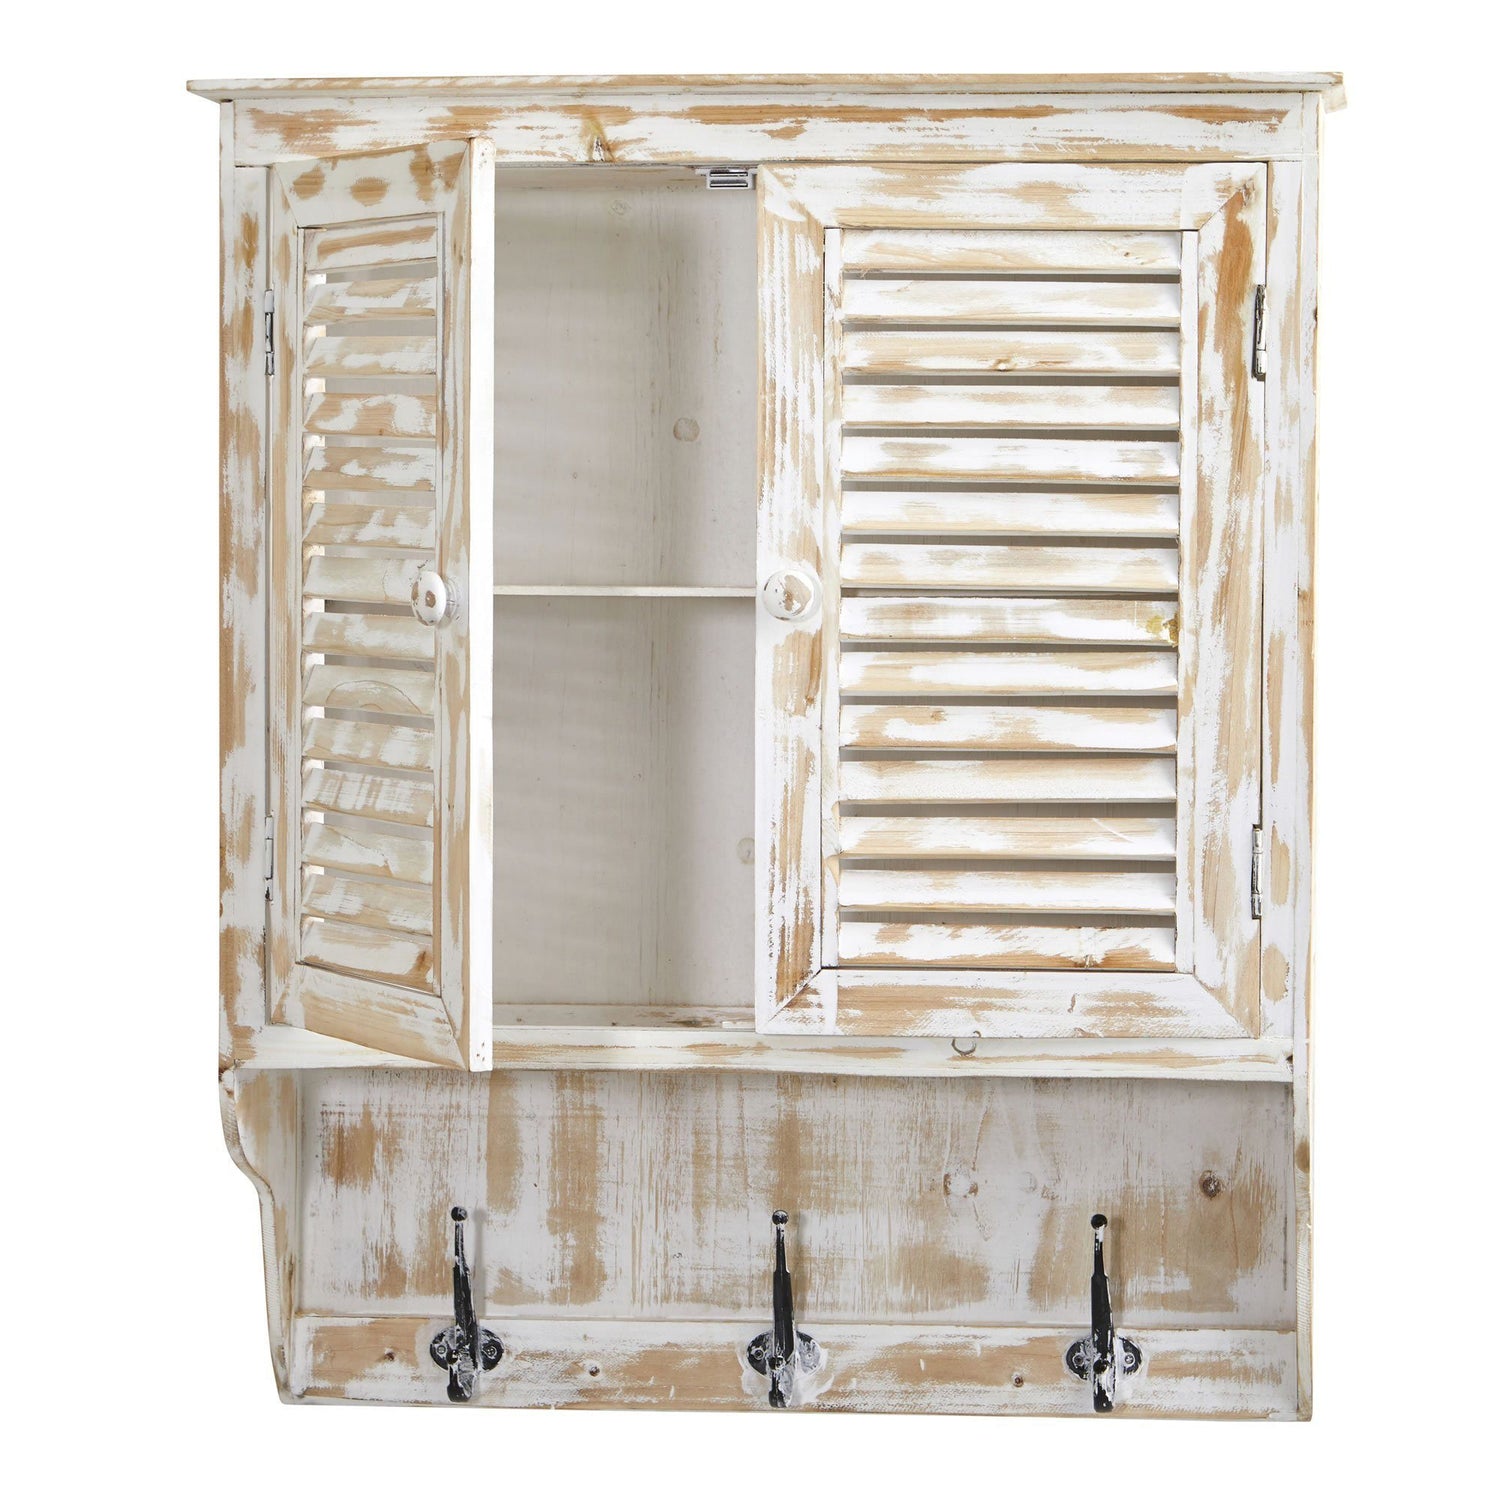 32” White Washed Wall Cabinet with Hooks